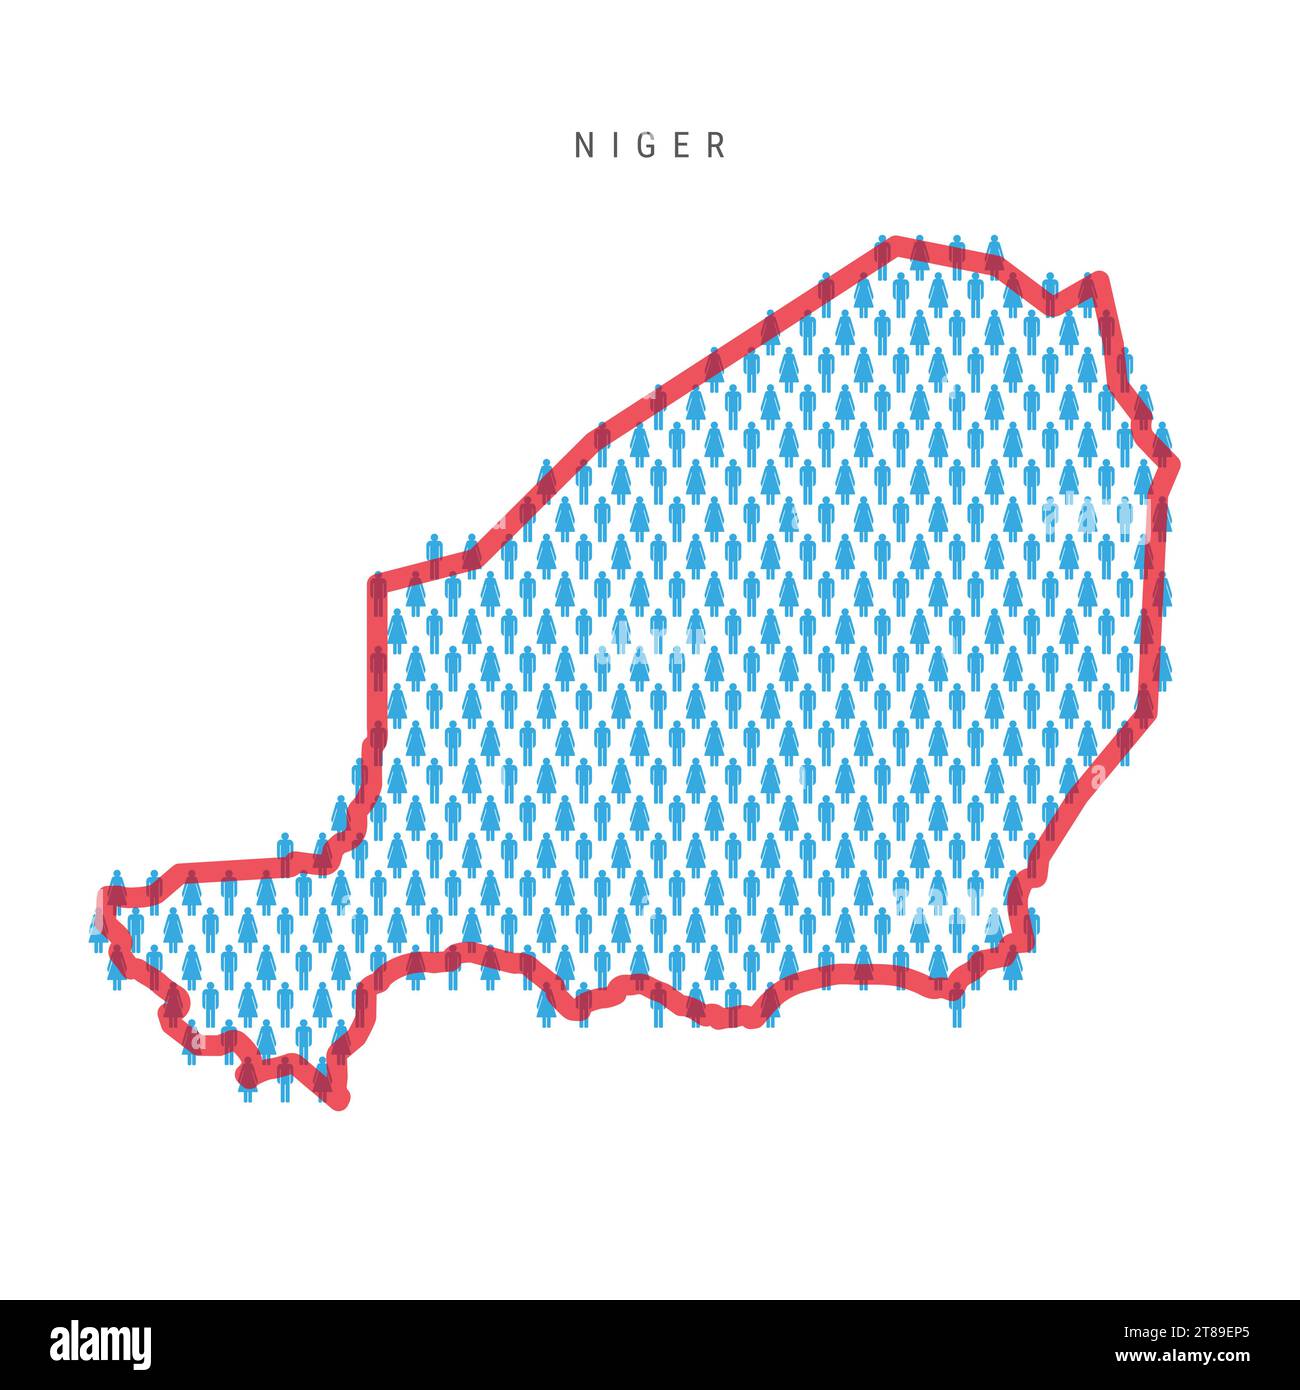 Niger population map. Stick figures Nigerian people map with bold red translucent country border. Pattern of men and women icons. Isolated vector illu Stock Vector